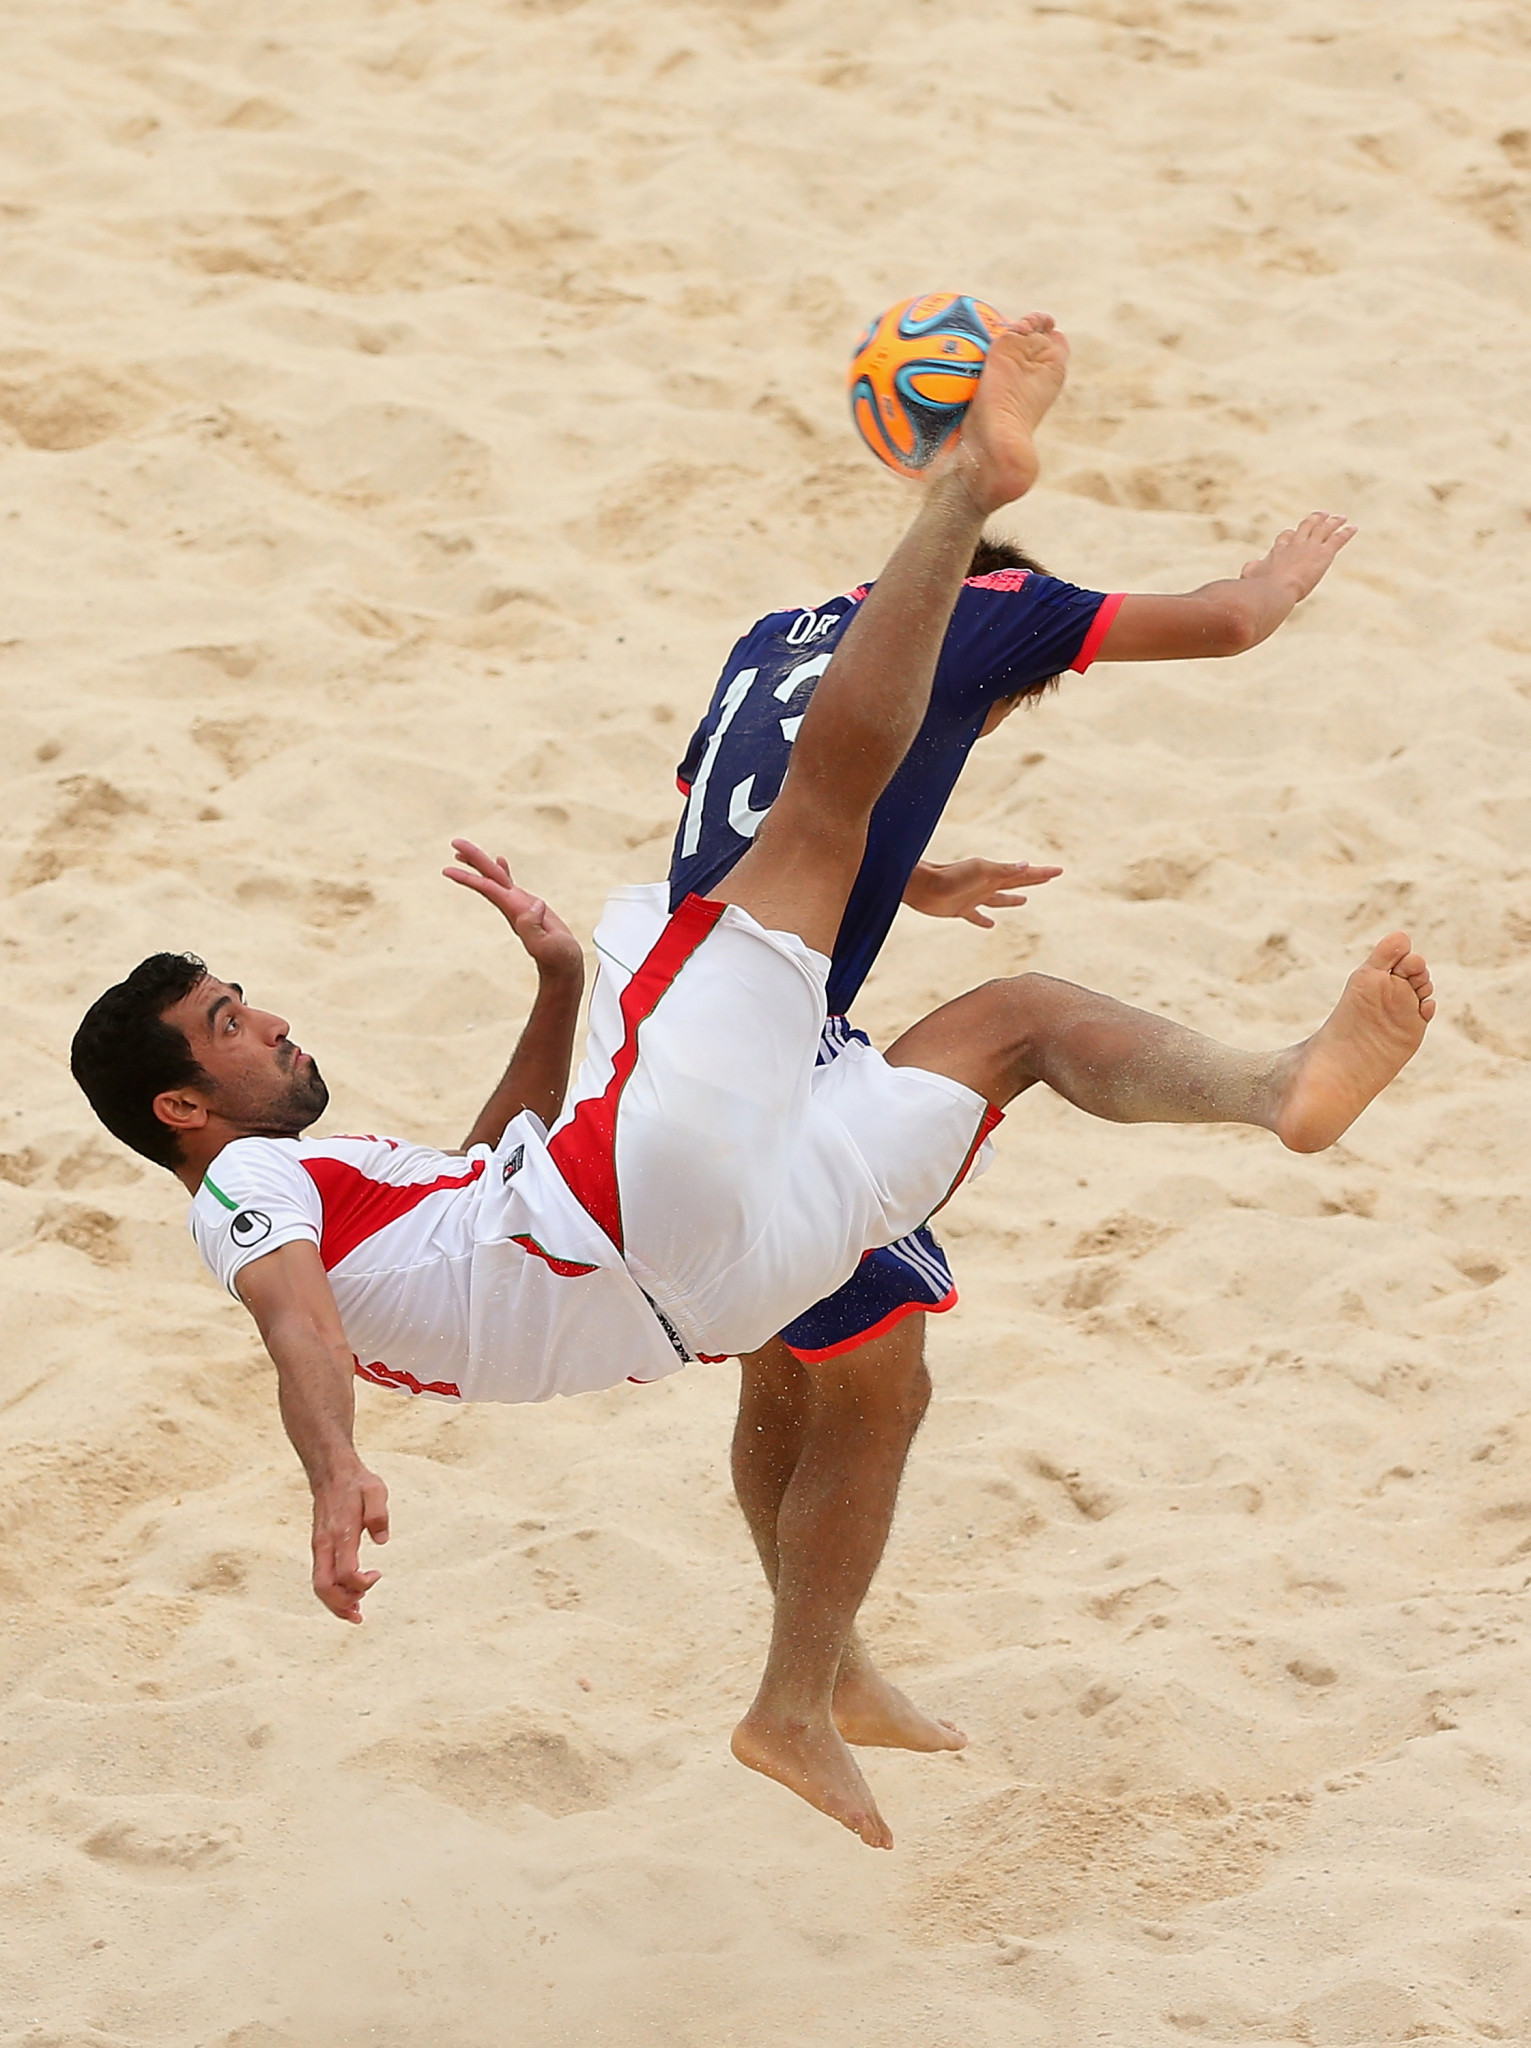 Mohammadali Mokhtari is among the 16 players named on Iran's men's beach soccer team for the 2019 ANOC World Beach Games in Qatar ©Getty Images